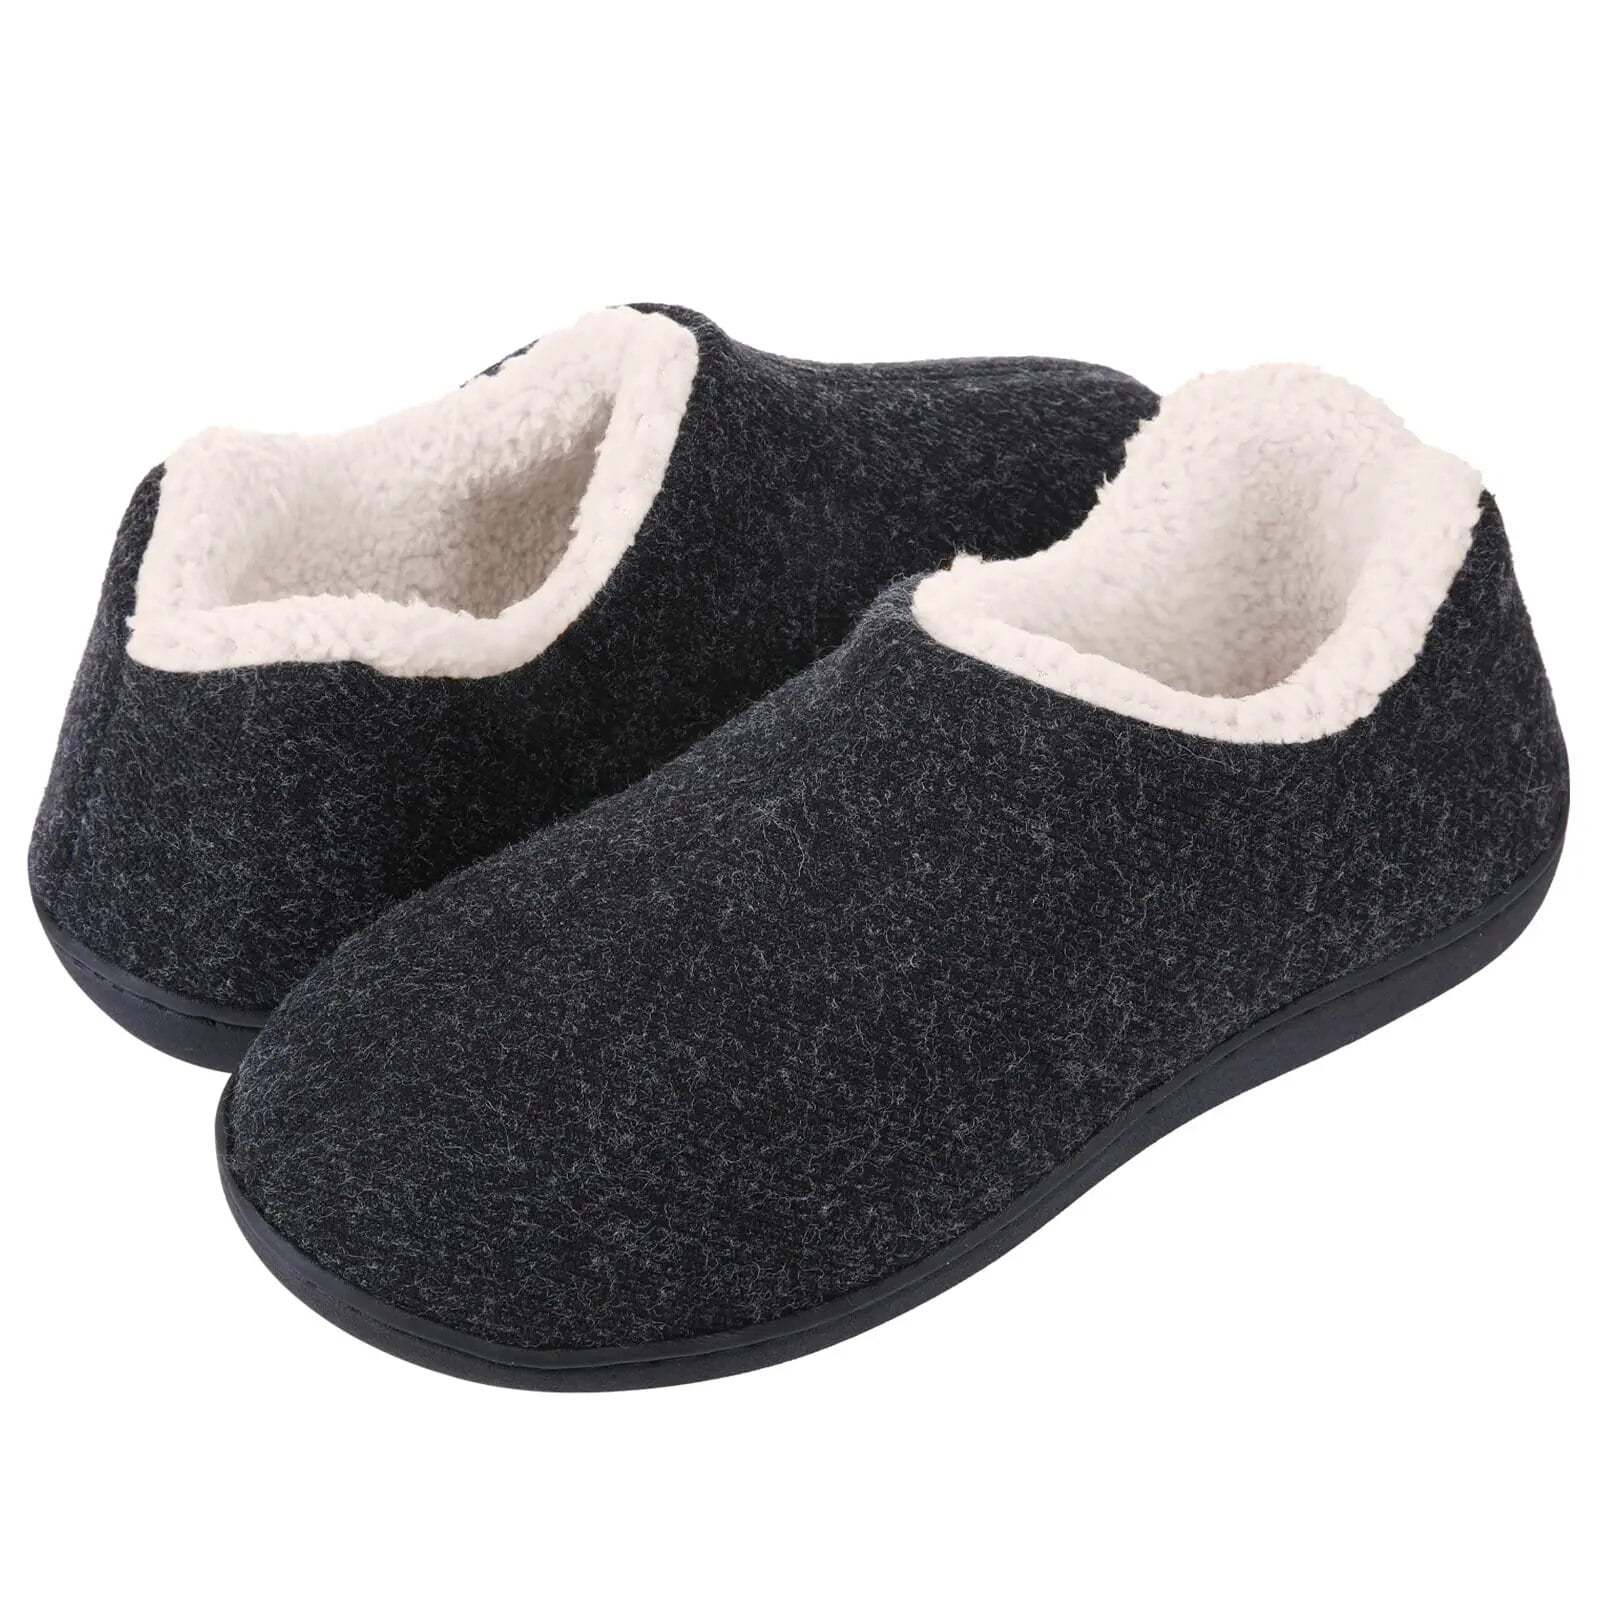 New Warm Cotton Slippers Women Winter House Fuzzy Slippers Female Soft ...